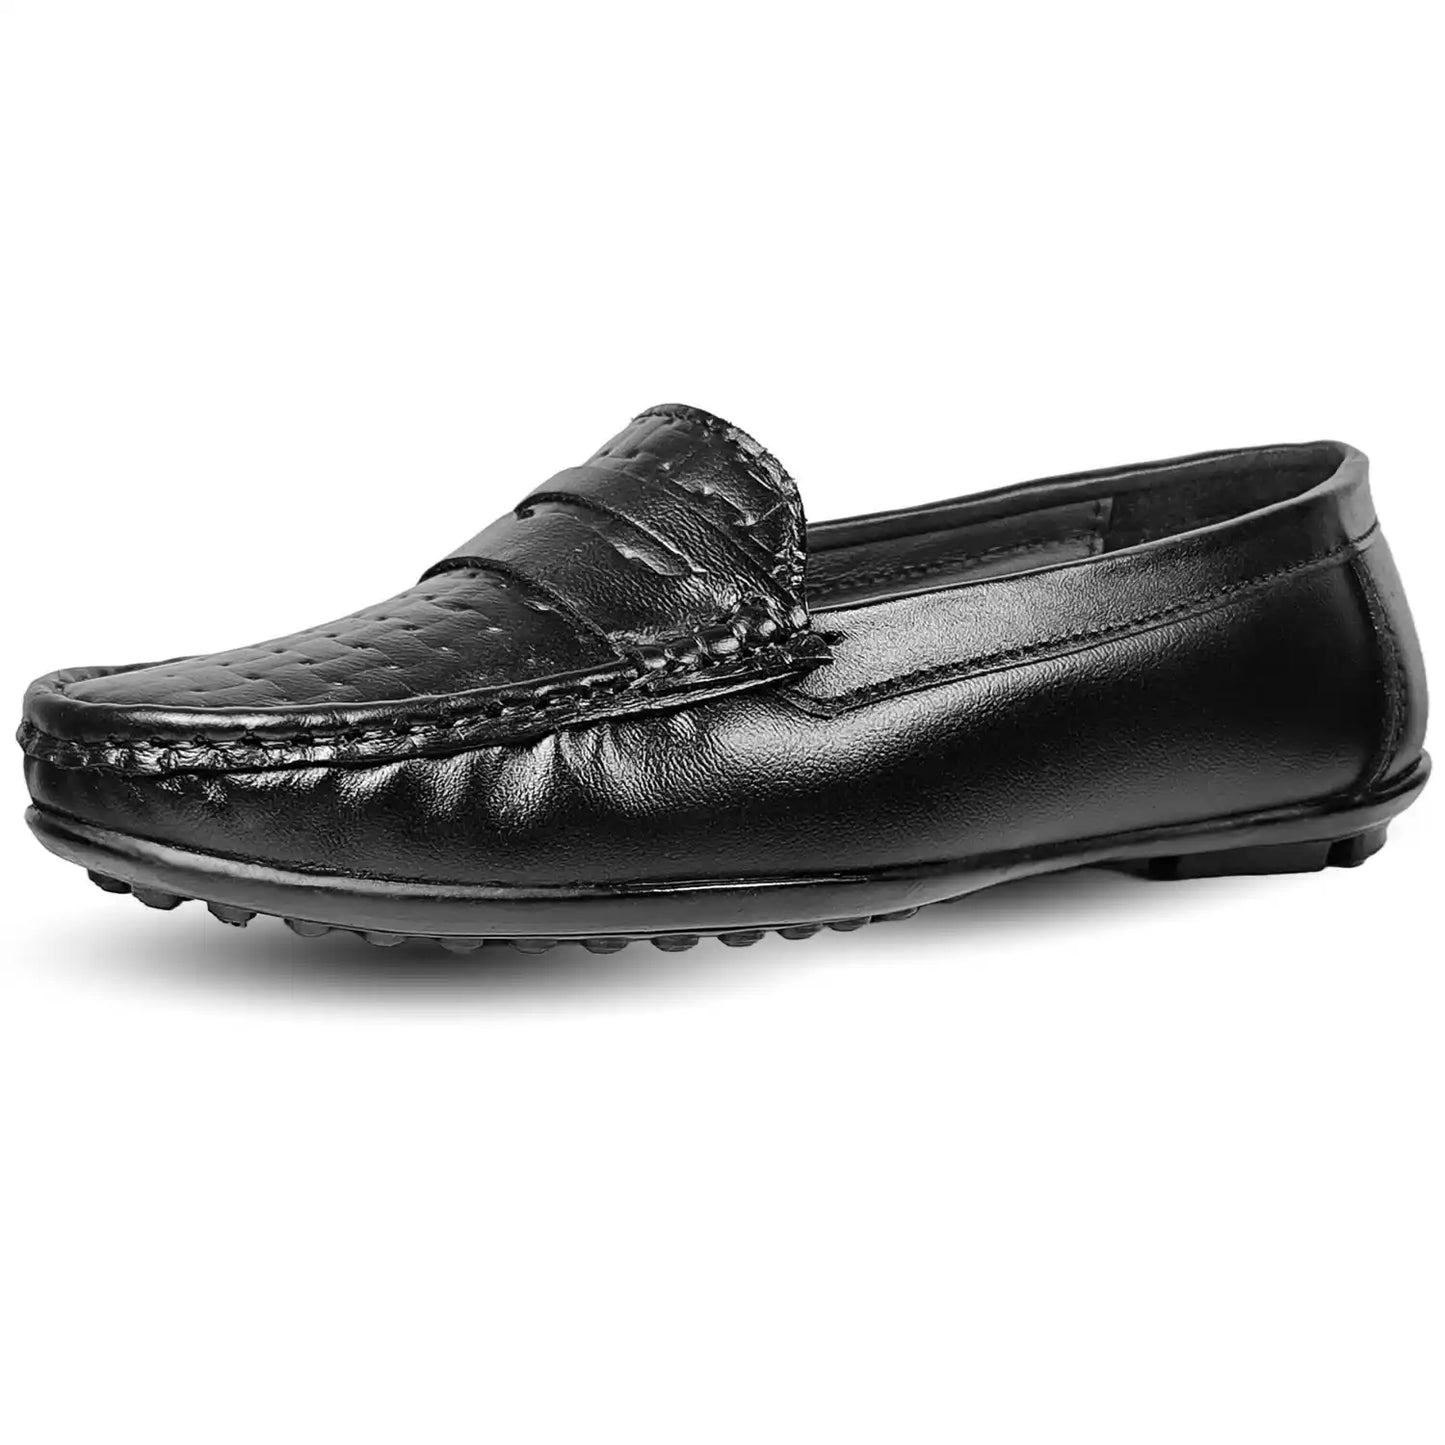 Formal Loafers for Ladies Pure Leather Office Slip On shoes for Women